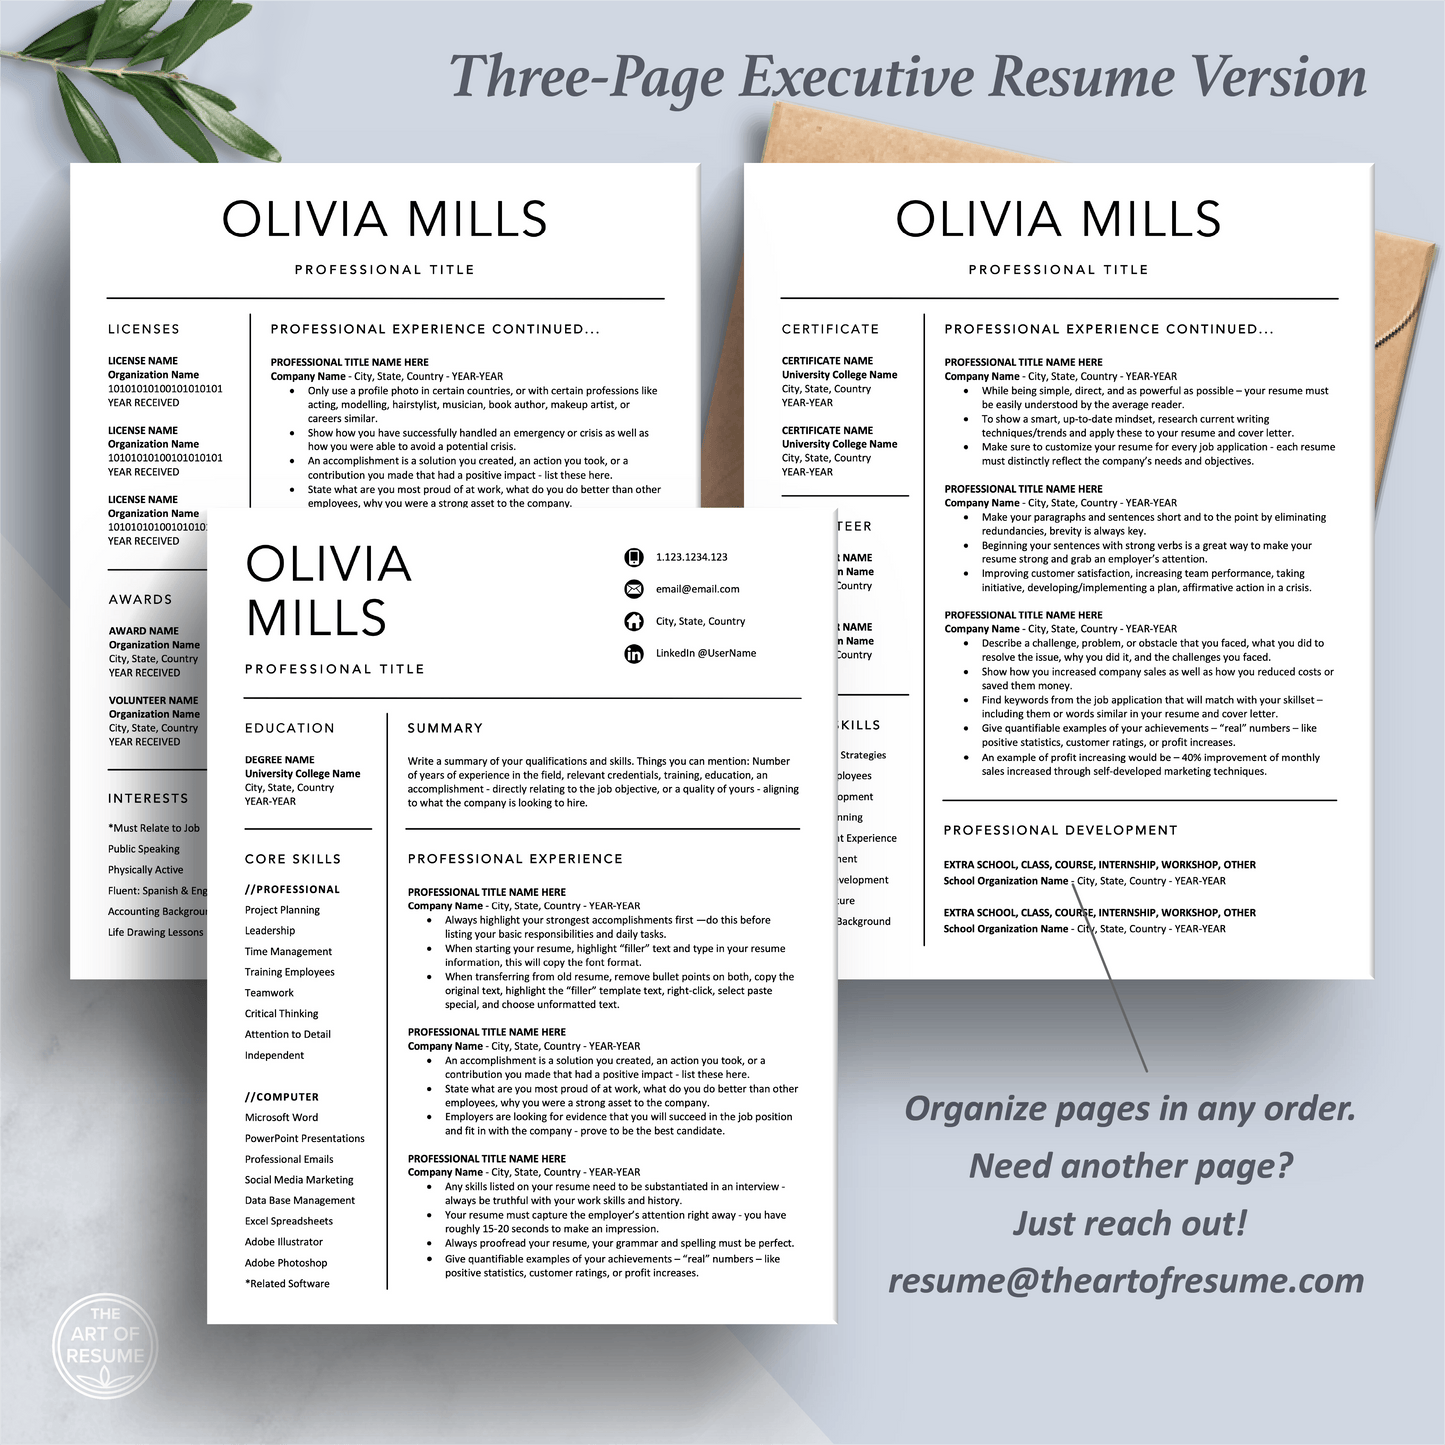 The Art of Resume Templates | Three-Page Professional Simple Executive C-Suite Level  Resume CV Template Format | Curriculum Vitae